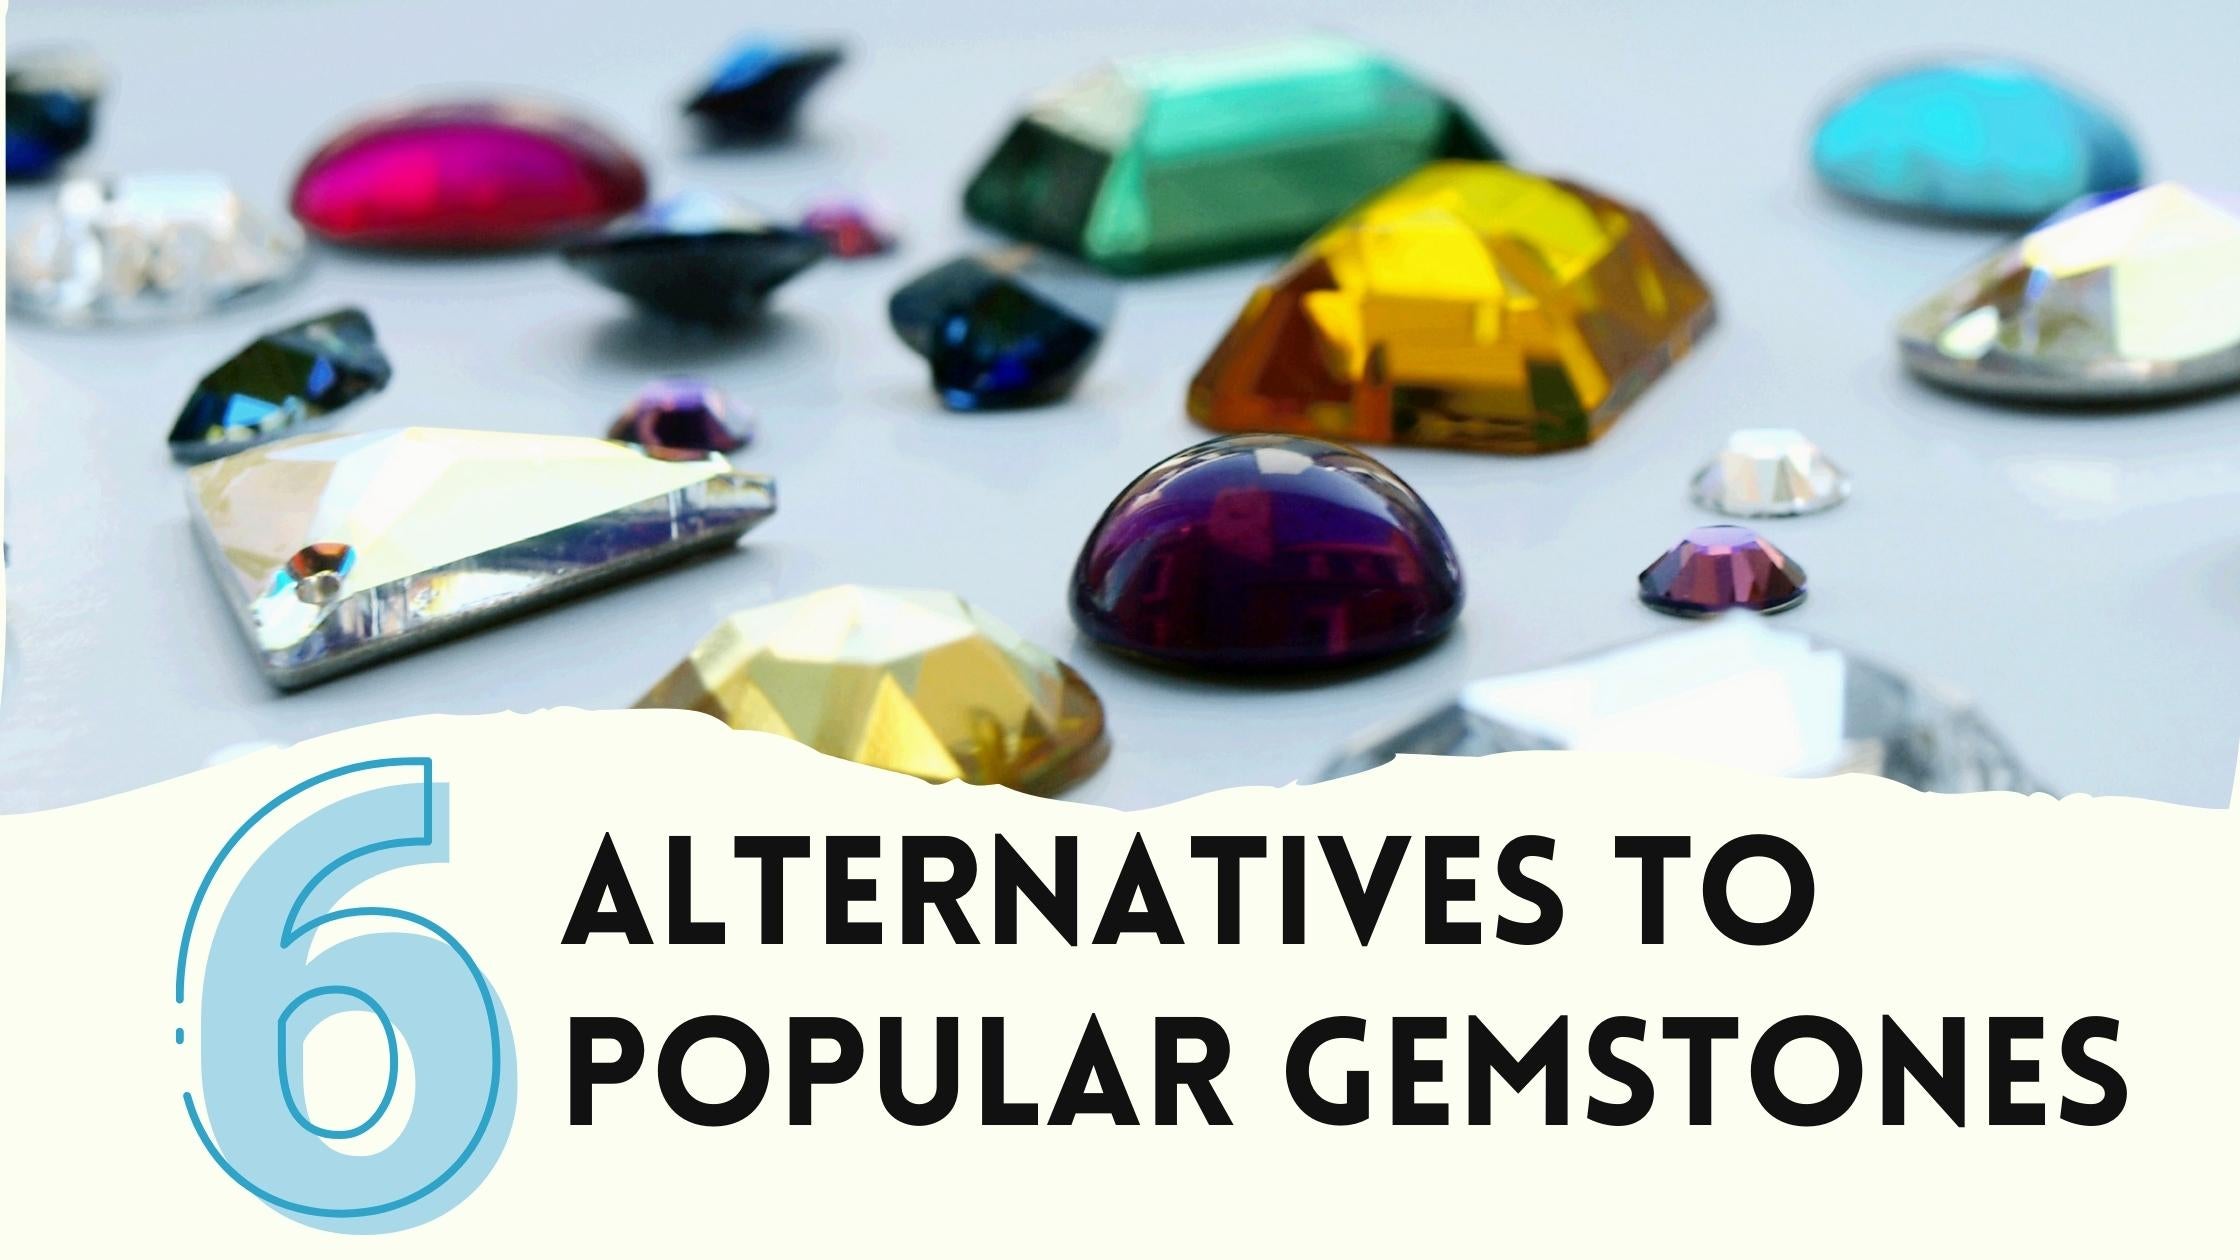 6 Alternatives to Expensive and Popular Gemstones